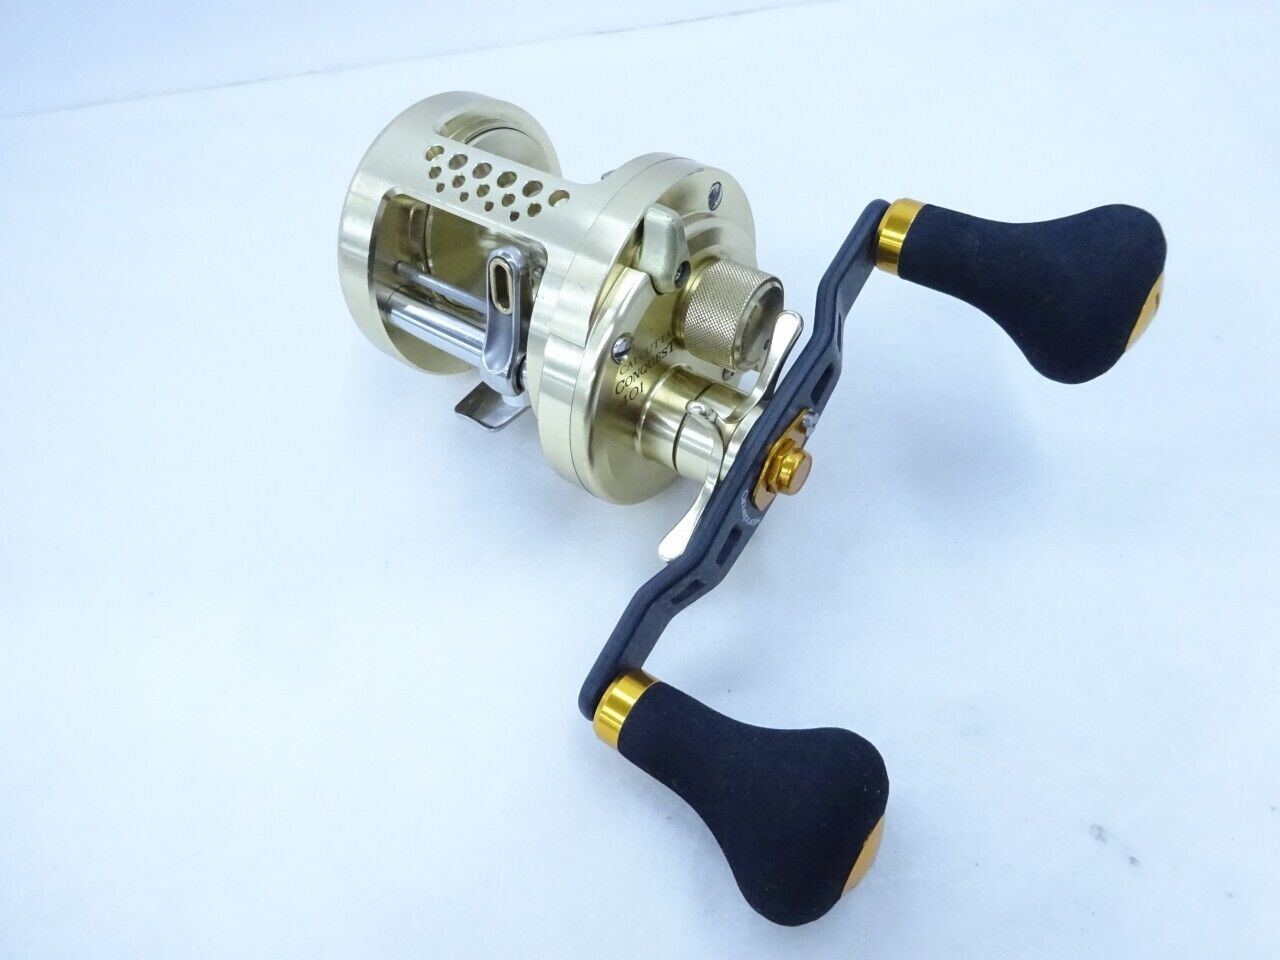 Shimano 03 CALCUTTA CONQUEST 401 Left Handle 5.0:1 Baitcast Reel F/S from JP